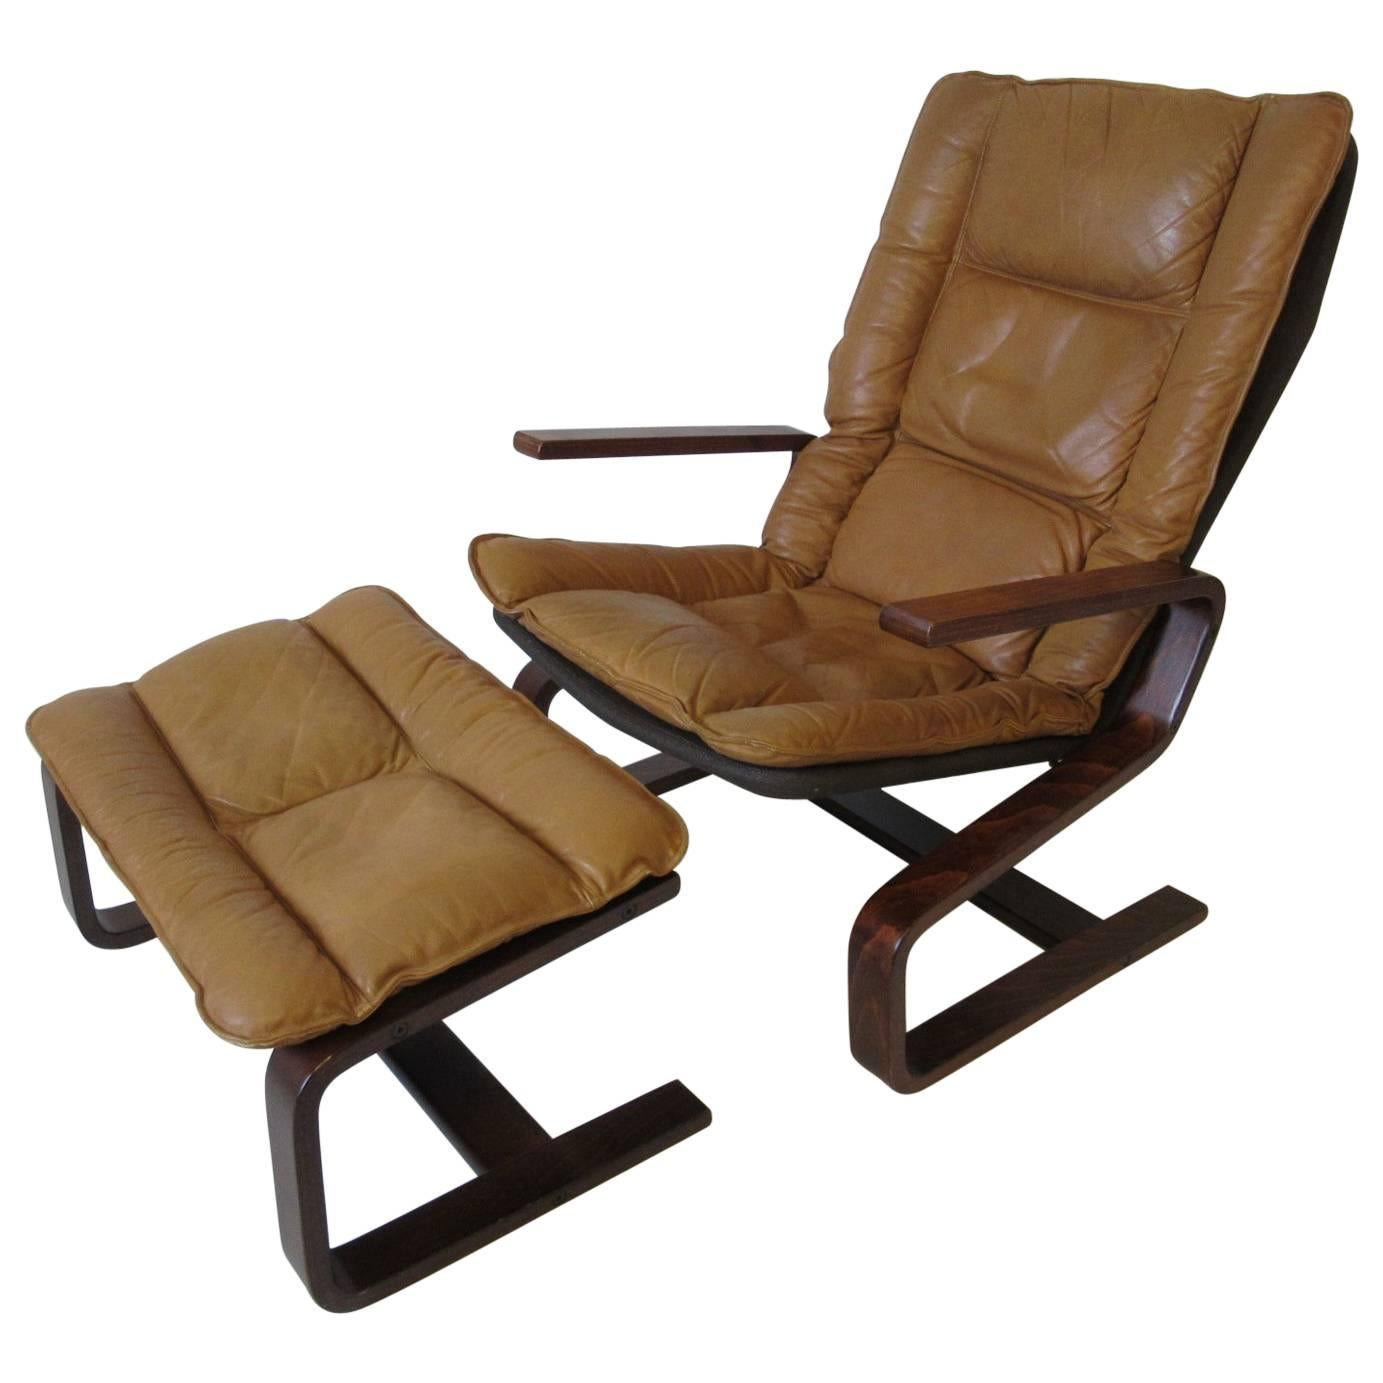 Ingmar Relling Danish Styled Leather Lounge Chair and Ottoman by Westnofa